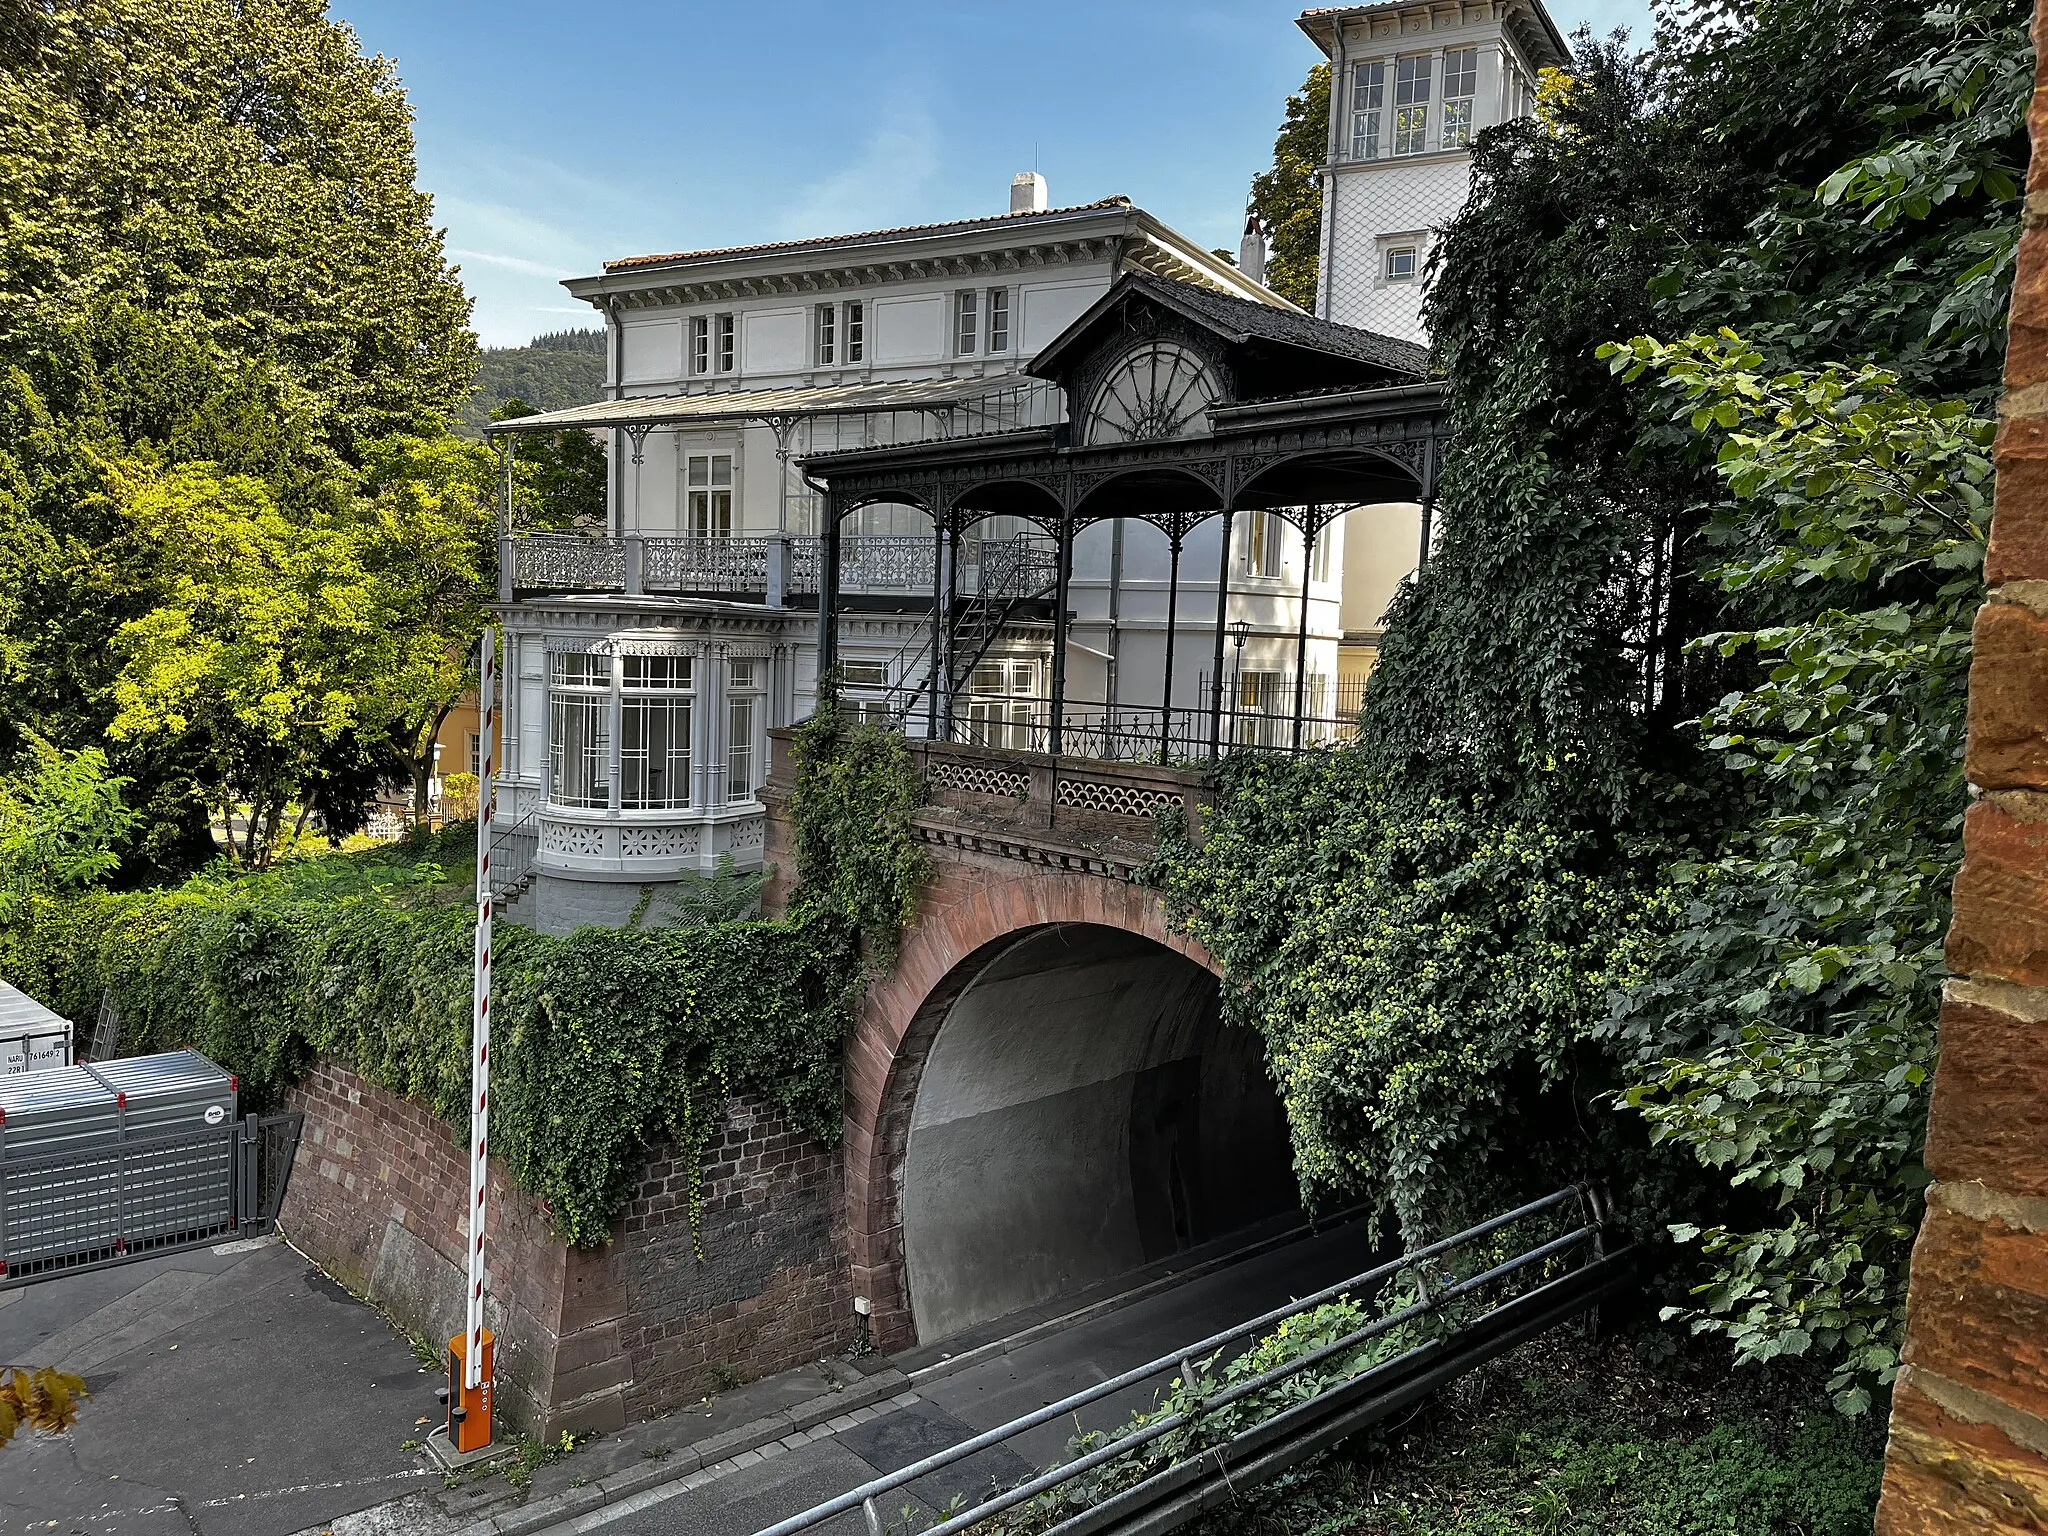 Photo showing: Gaisbergtunnel (west portal, built in 1859/1862) in Heidelberg at the Adenauerplatz. The Odenwaldbahn ran here until 1955, and since 1962 there has been a road tunnel to the Friedrich-Ebert facility. The immediately adjacent listed villa from the 19th century rests on the late medieval fortifications of the Heidelberg suburb.